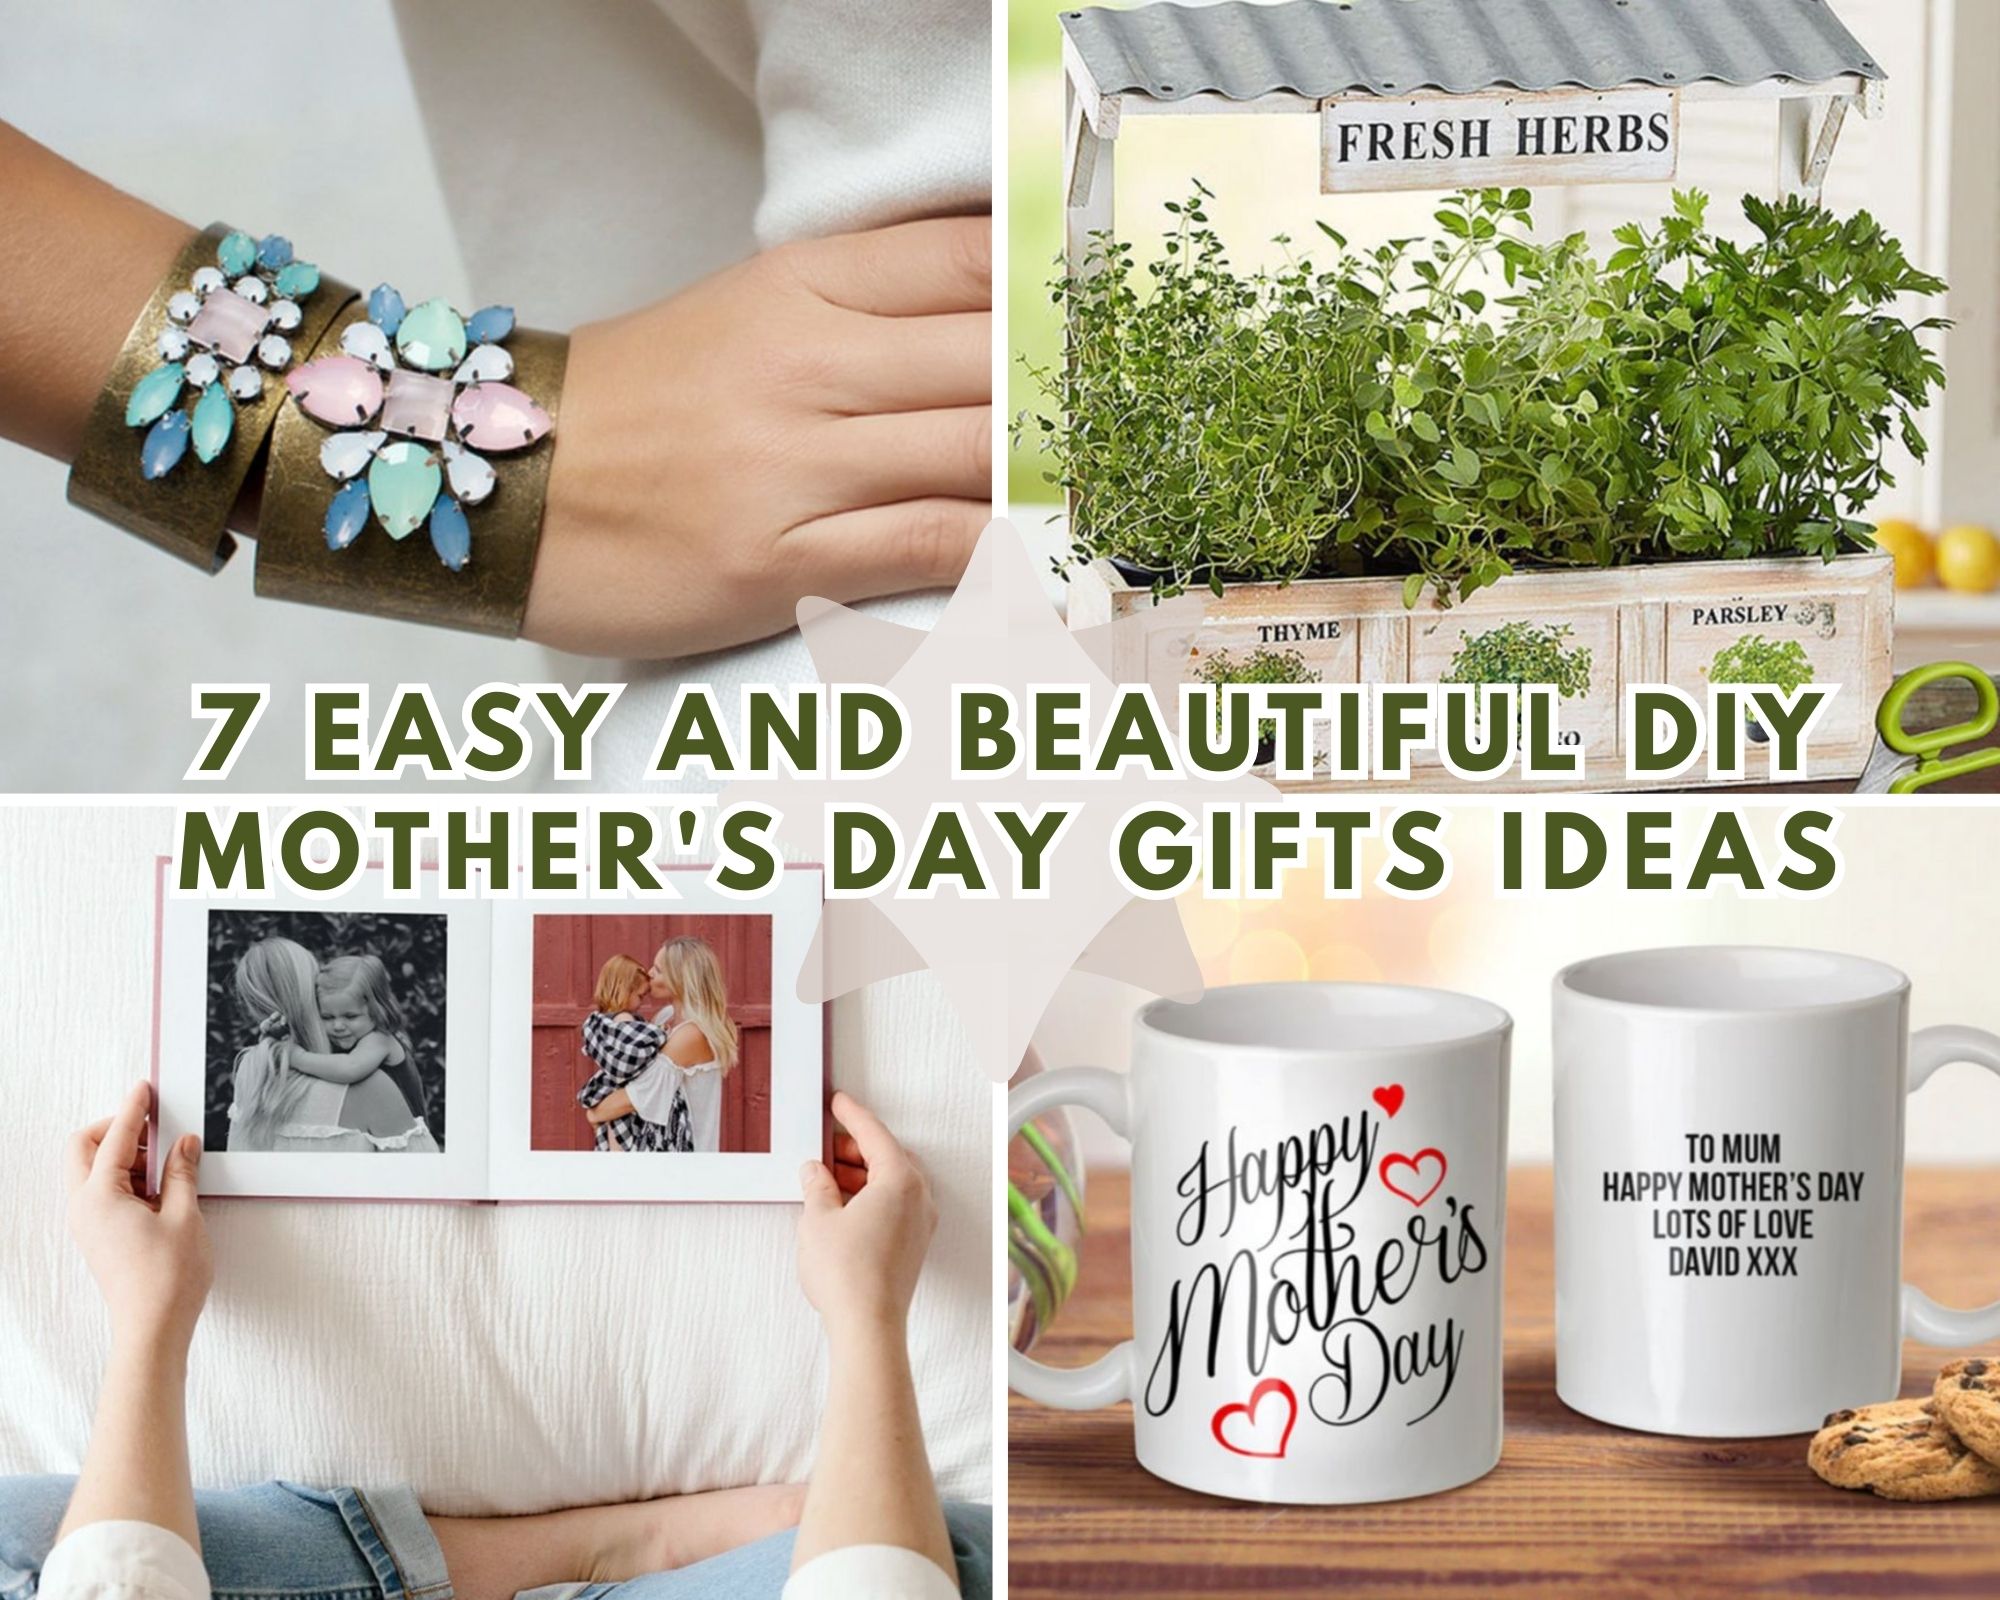 7 Easy And Beautiful DIY Mother's Day Gifts Ideas